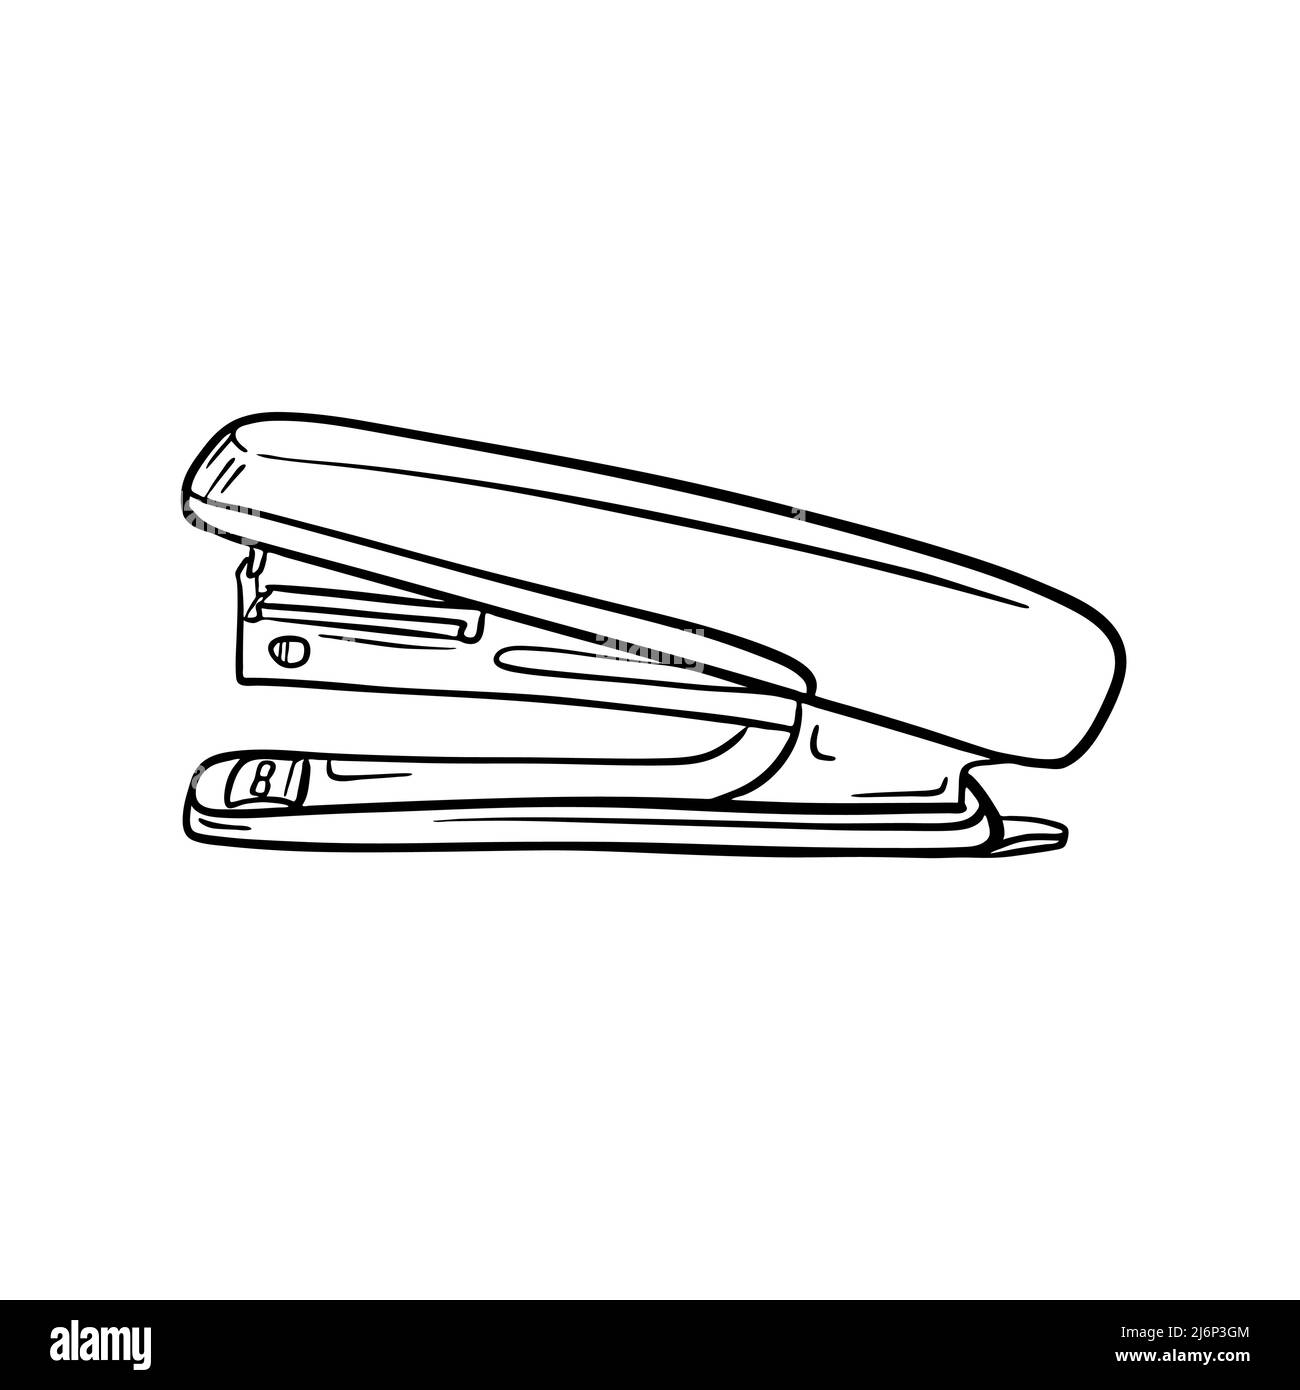 A sketch of the stapler. Stationery, office supplies for paper binding. Engraving style. Digital drawing. Side view. Hand drawn and isolated on white. Stock Vector